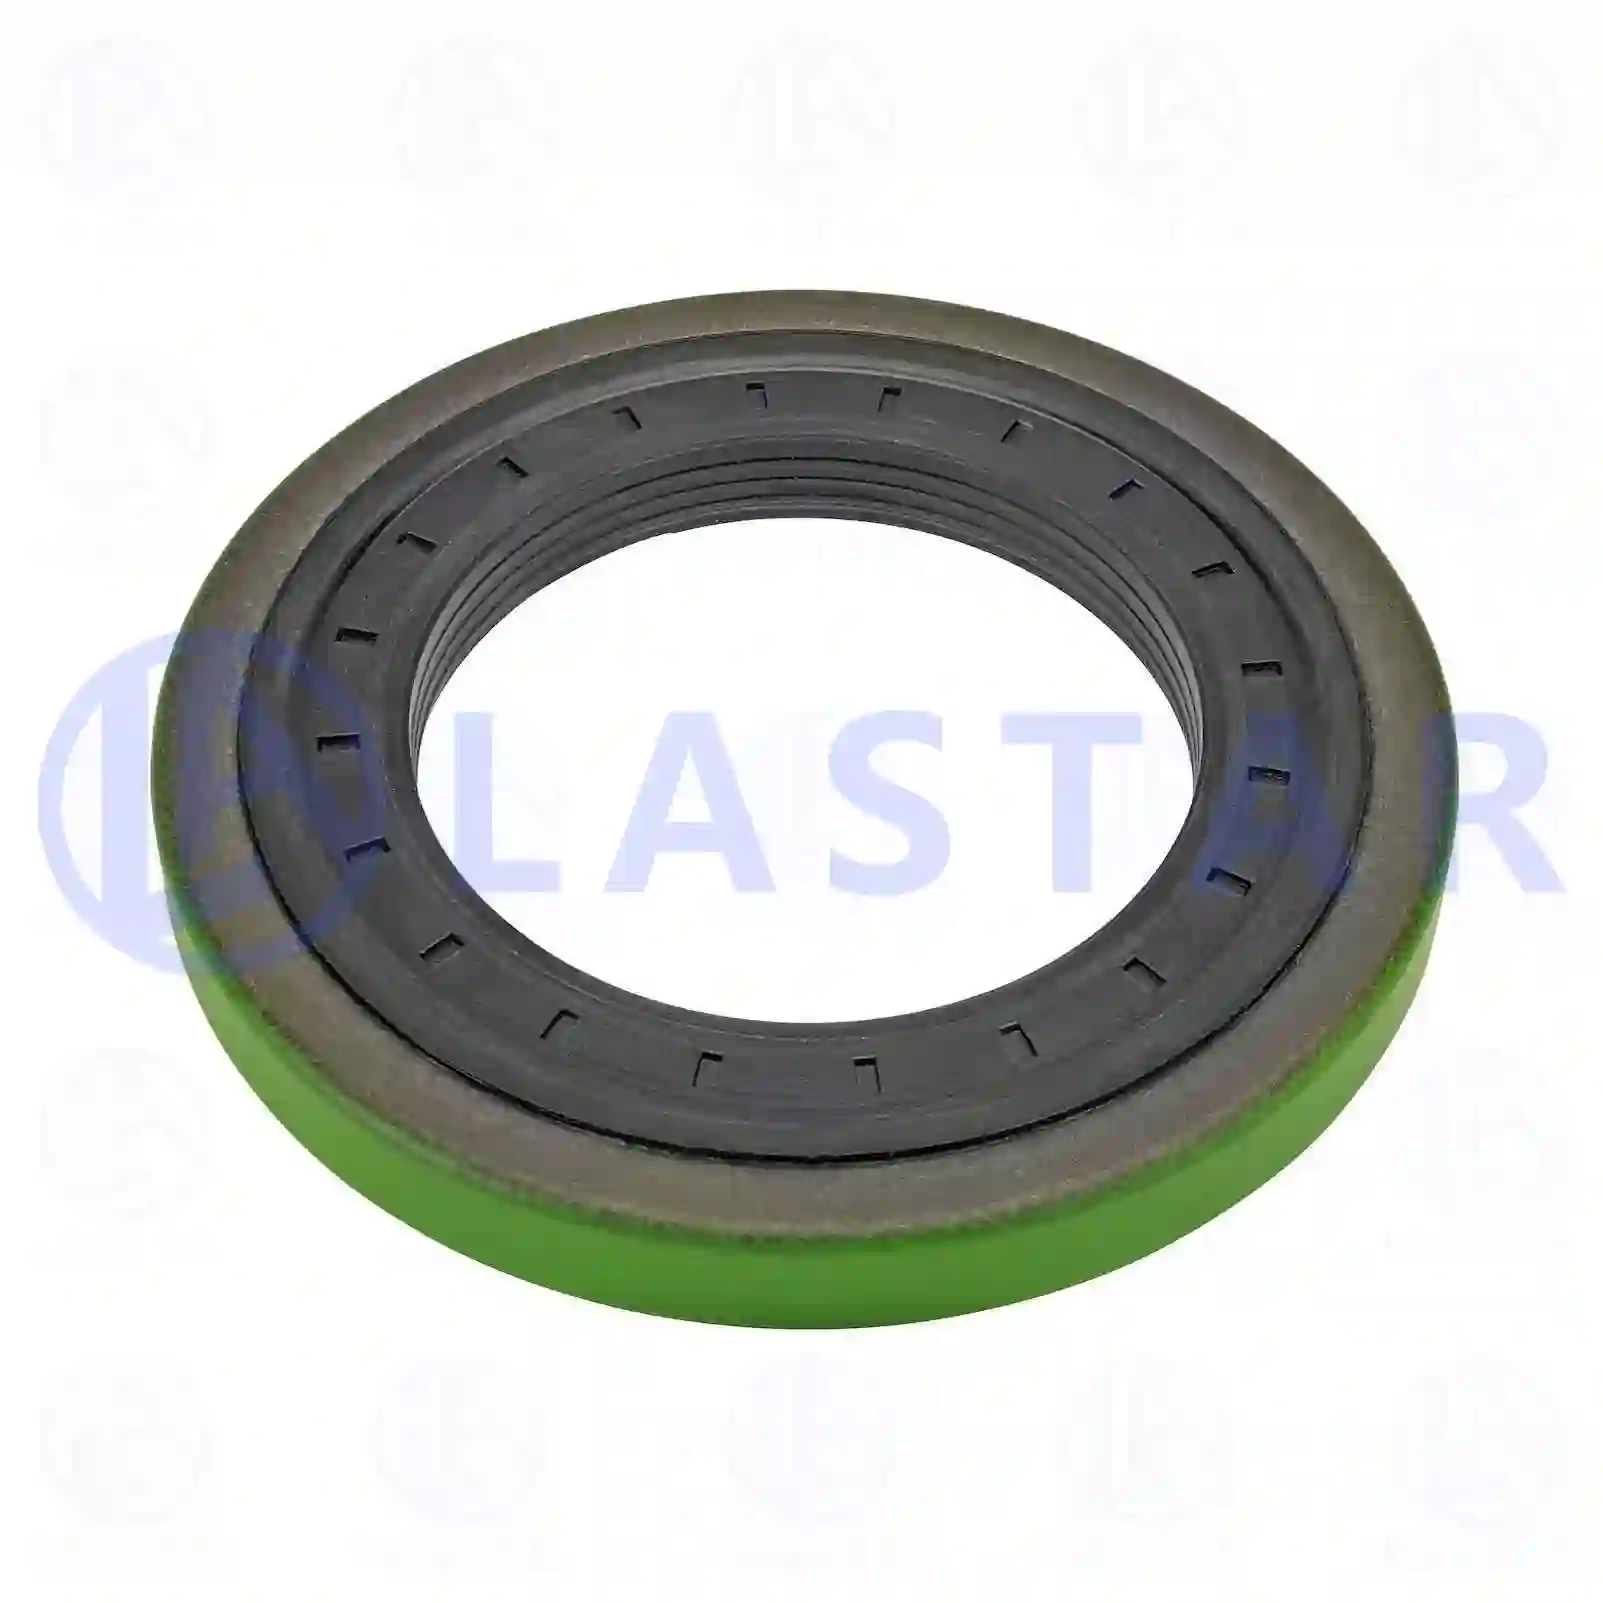 Oil seal, 77726112, 0376992, 376992, , , ||  77726112 Lastar Spare Part | Truck Spare Parts, Auotomotive Spare Parts Oil seal, 77726112, 0376992, 376992, , , ||  77726112 Lastar Spare Part | Truck Spare Parts, Auotomotive Spare Parts